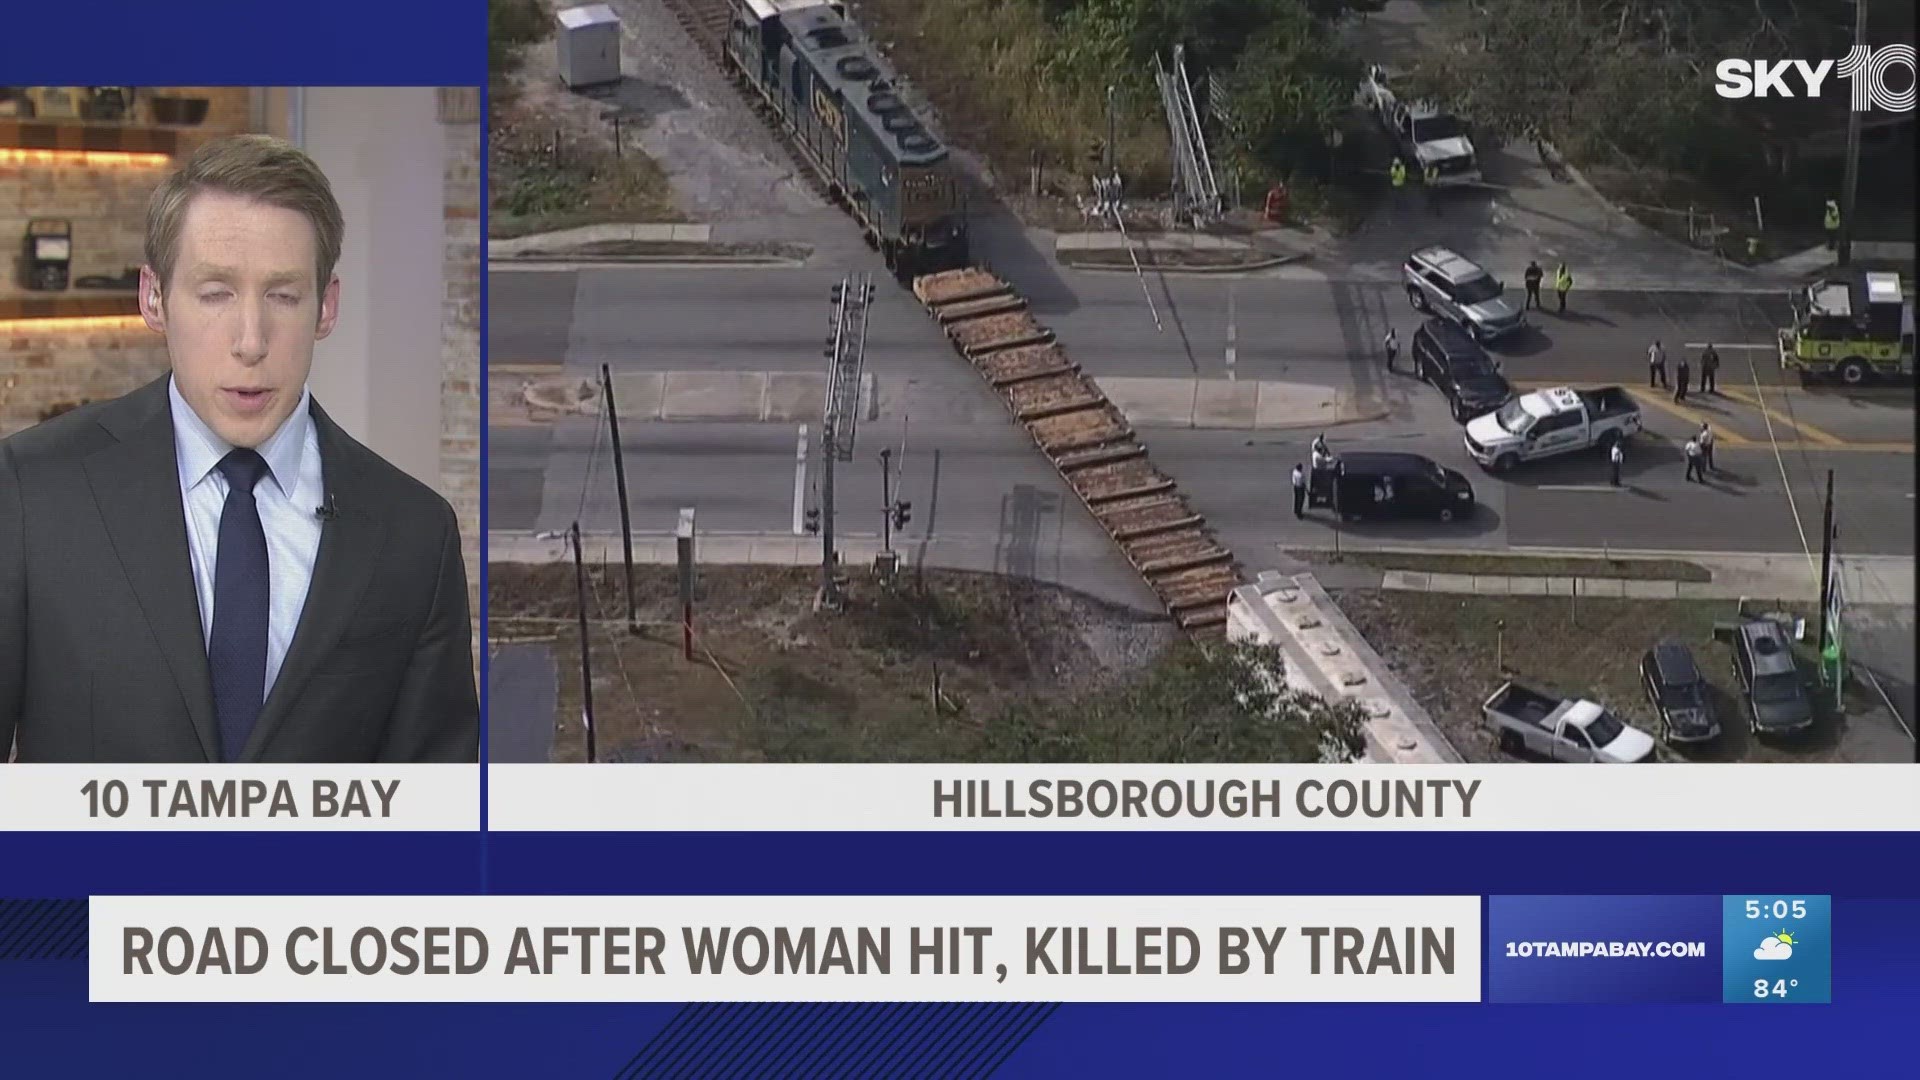 Authorities said the woman was sitting on the tracks at the time of the crash.